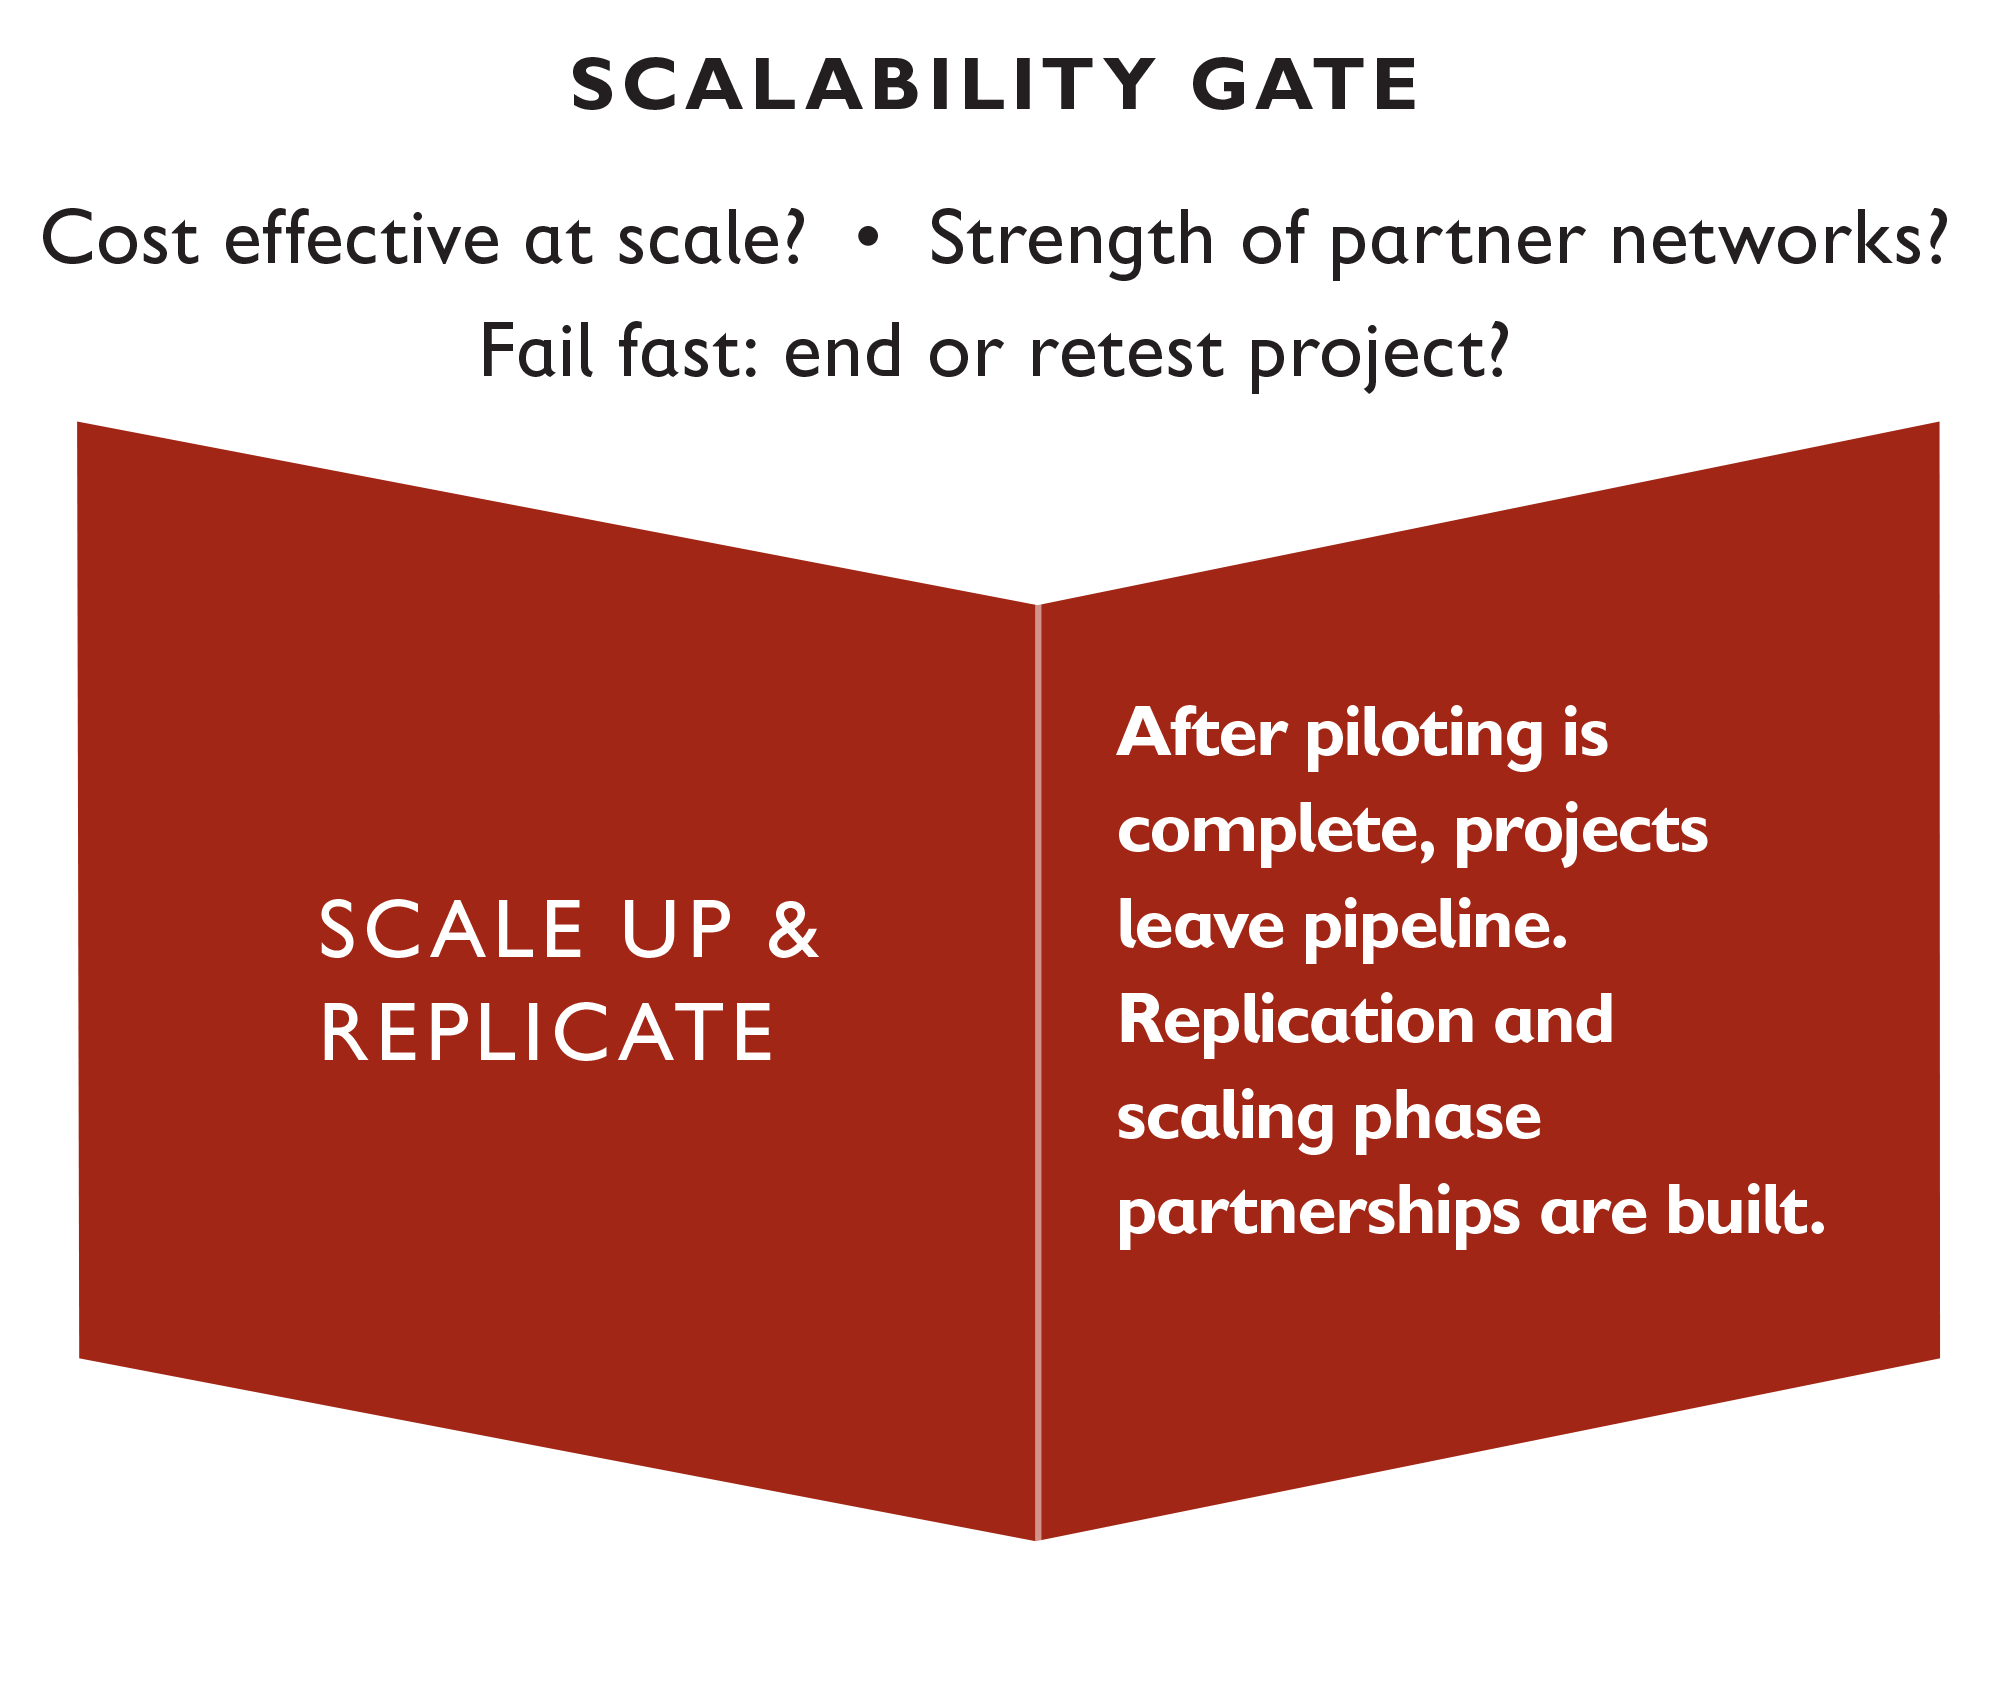 Scalability gate: Ask key questions … is this cost-effective at scale? What is the strength of our partner networks? How can we fail fast and determine whether to end or retest the project? After piloting is complete, projects live the incubator pipeline. Replication and scaling phase partnerships are built. 